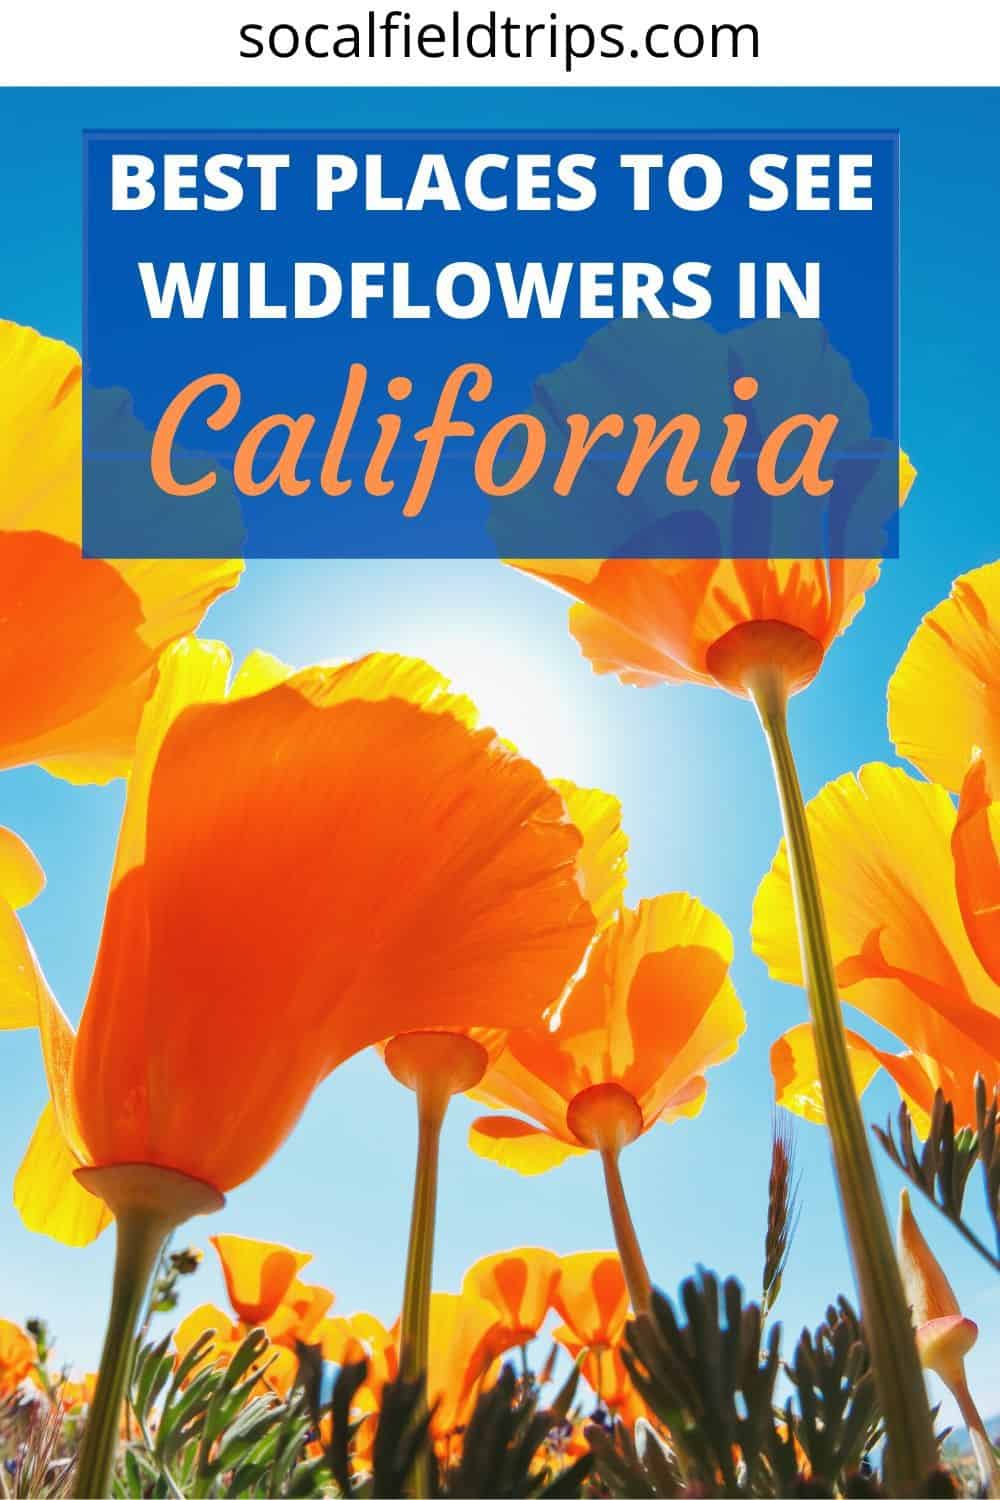 See the beautiful wildflowers in California this spring! Peak season for seeing wildflowers in Southern California can vary somewhat from year to year, based on rainfall amount and temperatures. Click here to read the full list of where to go and what types of flowers you will see including the famous California poppy. #wildflowers #la #losangeles #orangecounty #californiawildflowers #travel #familytravel #springtravel #travelphotography #southerncalifornia #socal #santabarbara #desert